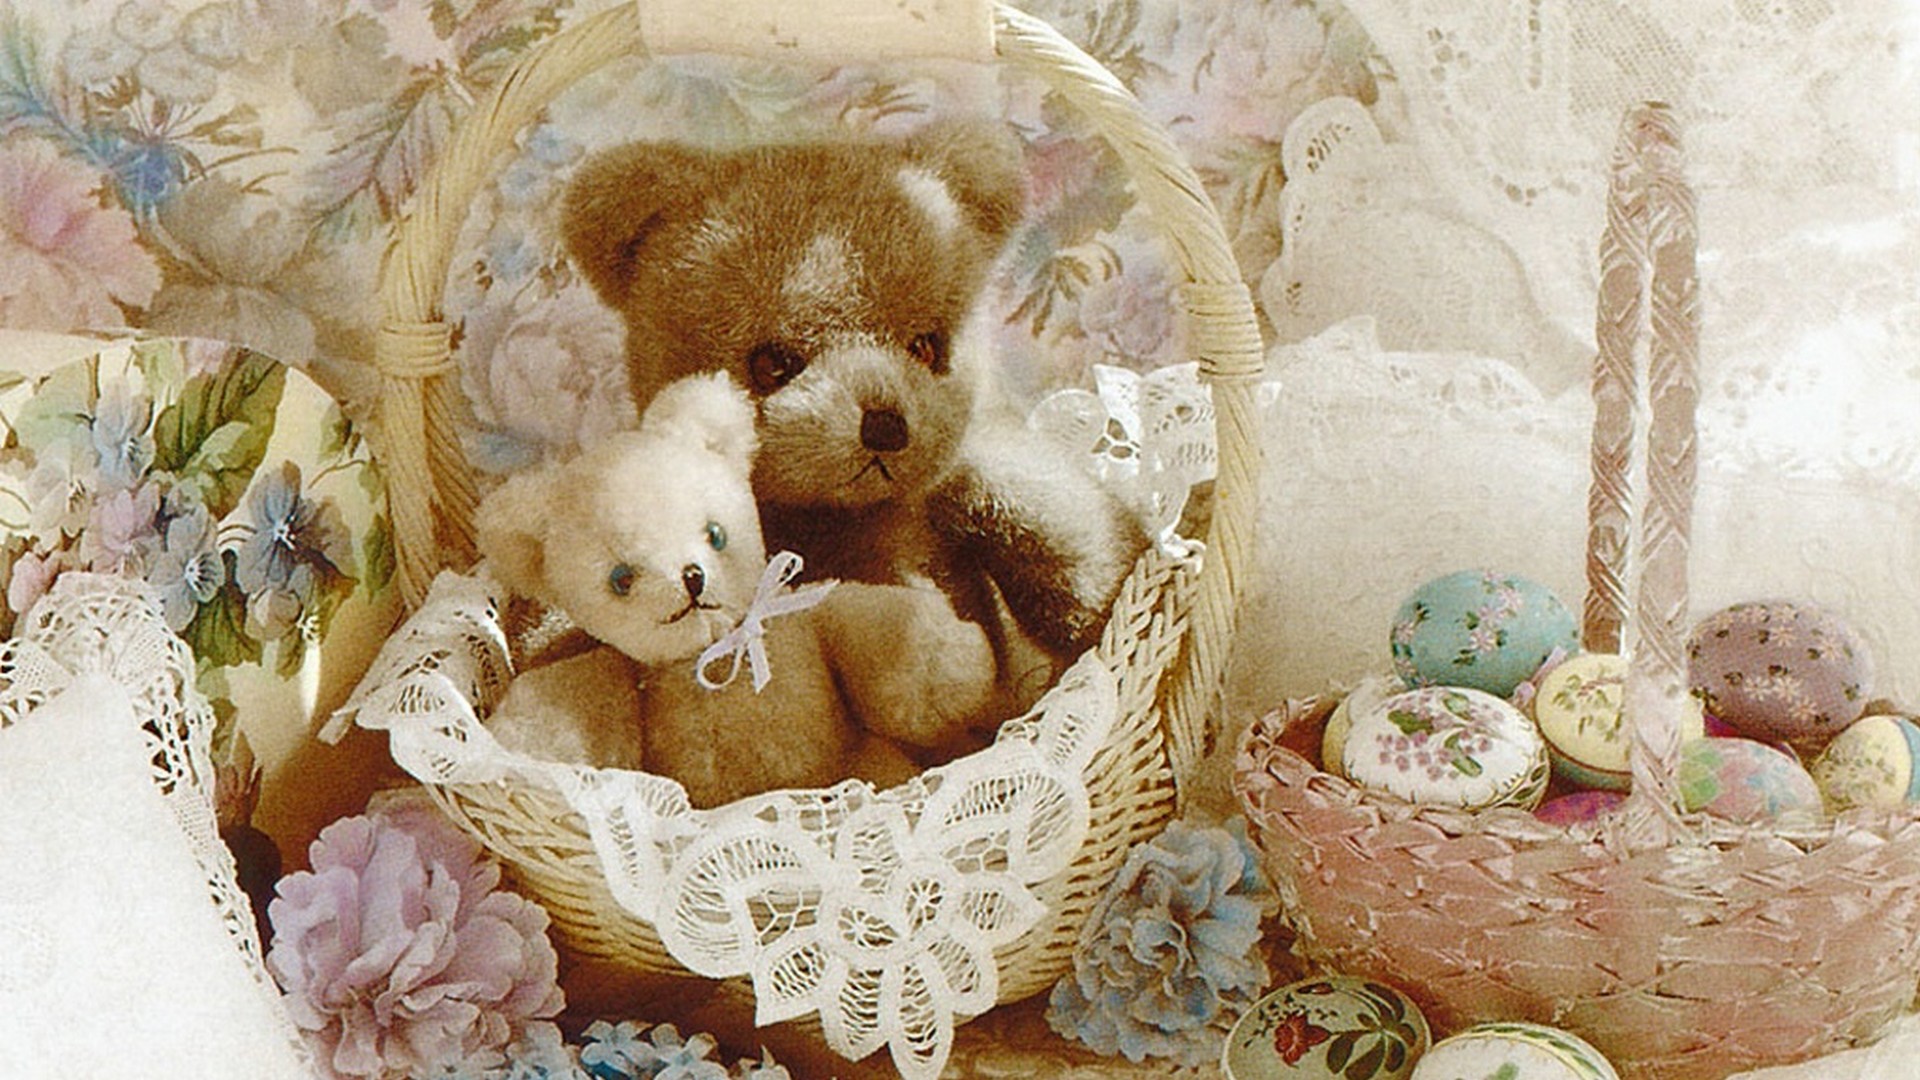 Cute Teddy Bear Desktop Backgrounds HD with image resolution 1920x1080 pixel. You can use this wallpaper as background for your desktop Computer Screensavers, Android or iPhone smartphones